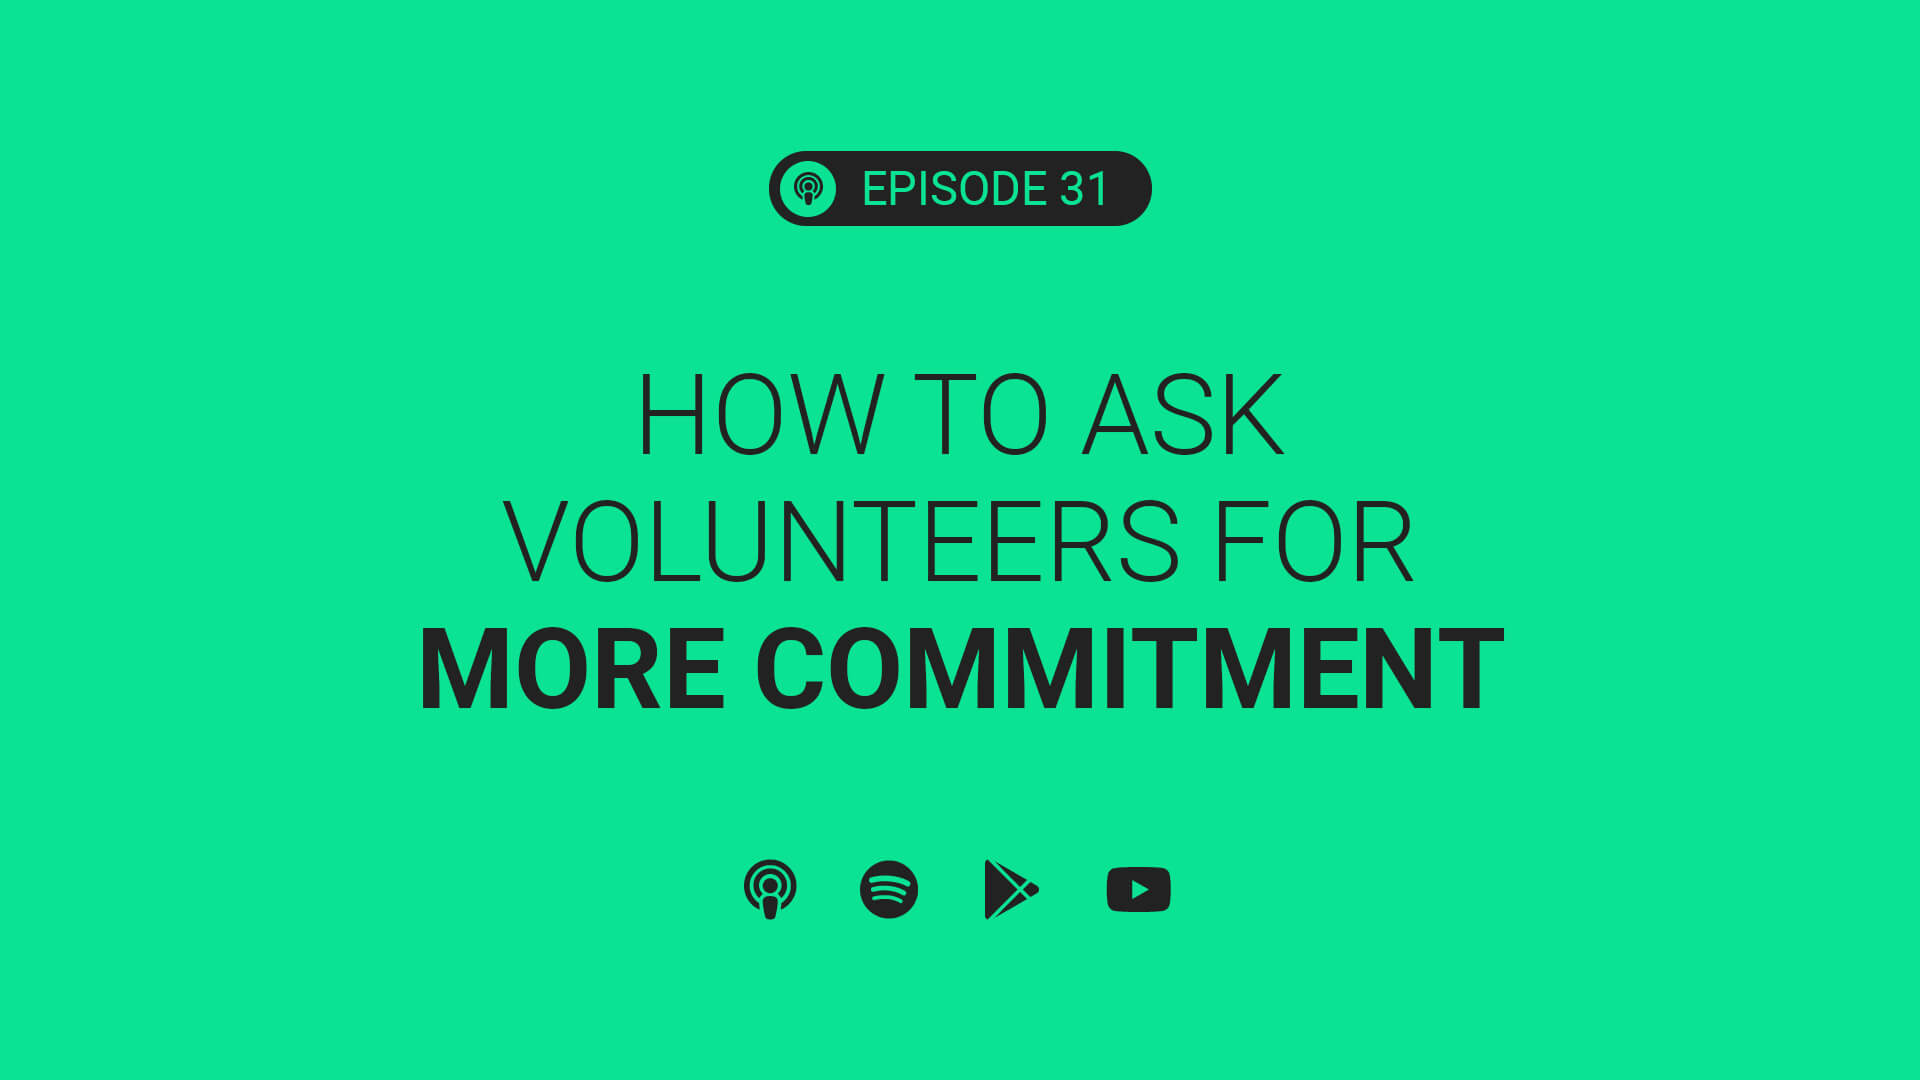 How to Ask Volunteers for More Commitment